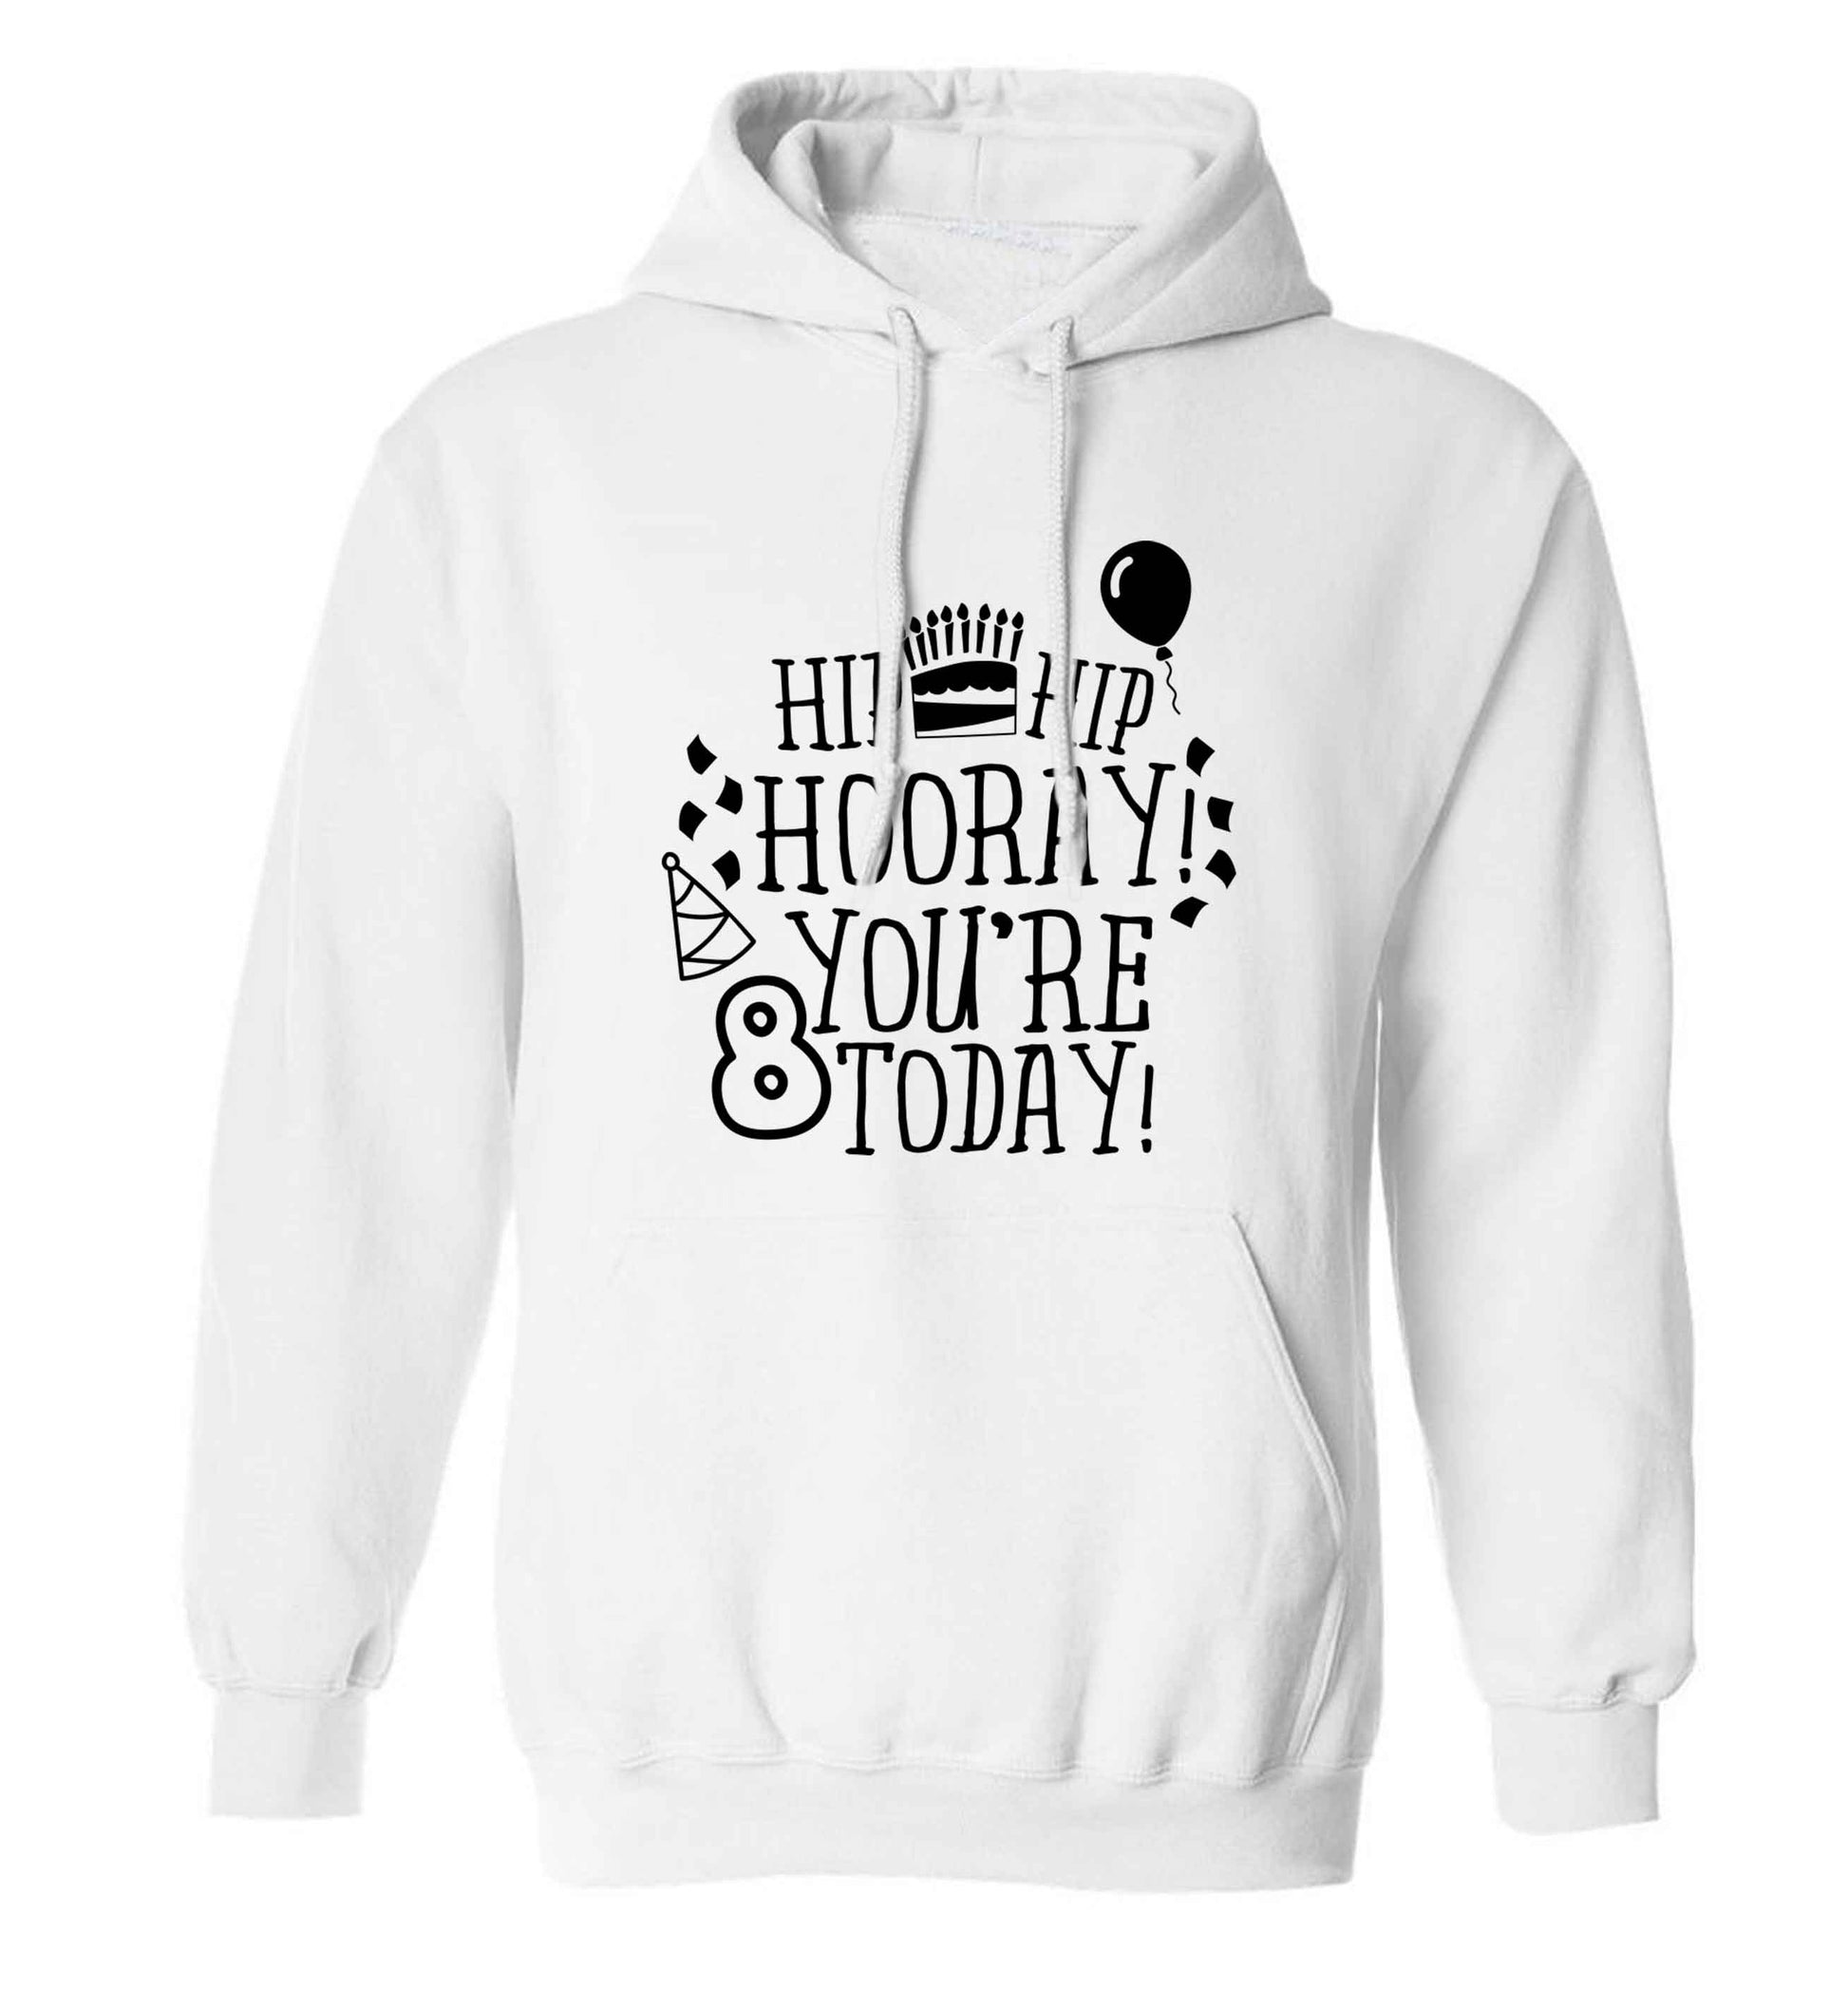 Hip hip hooray you're 8 today! adults unisex white hoodie 2XL